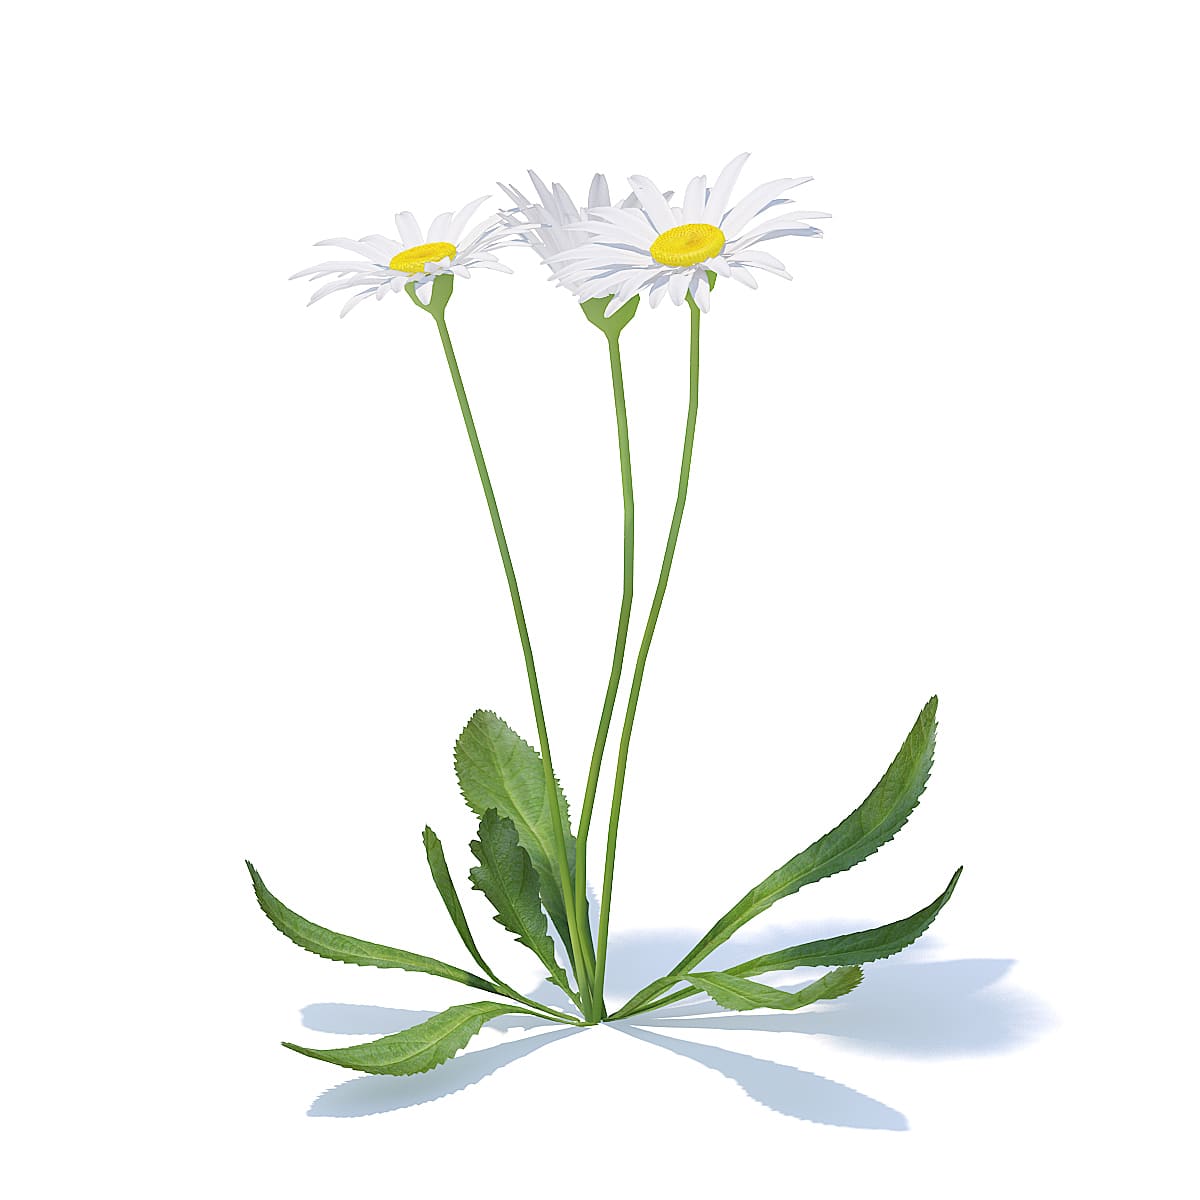 Daisies 3D Model - CGAxis - 3D models, PBR, HDRI for your 3D visualizations  projects